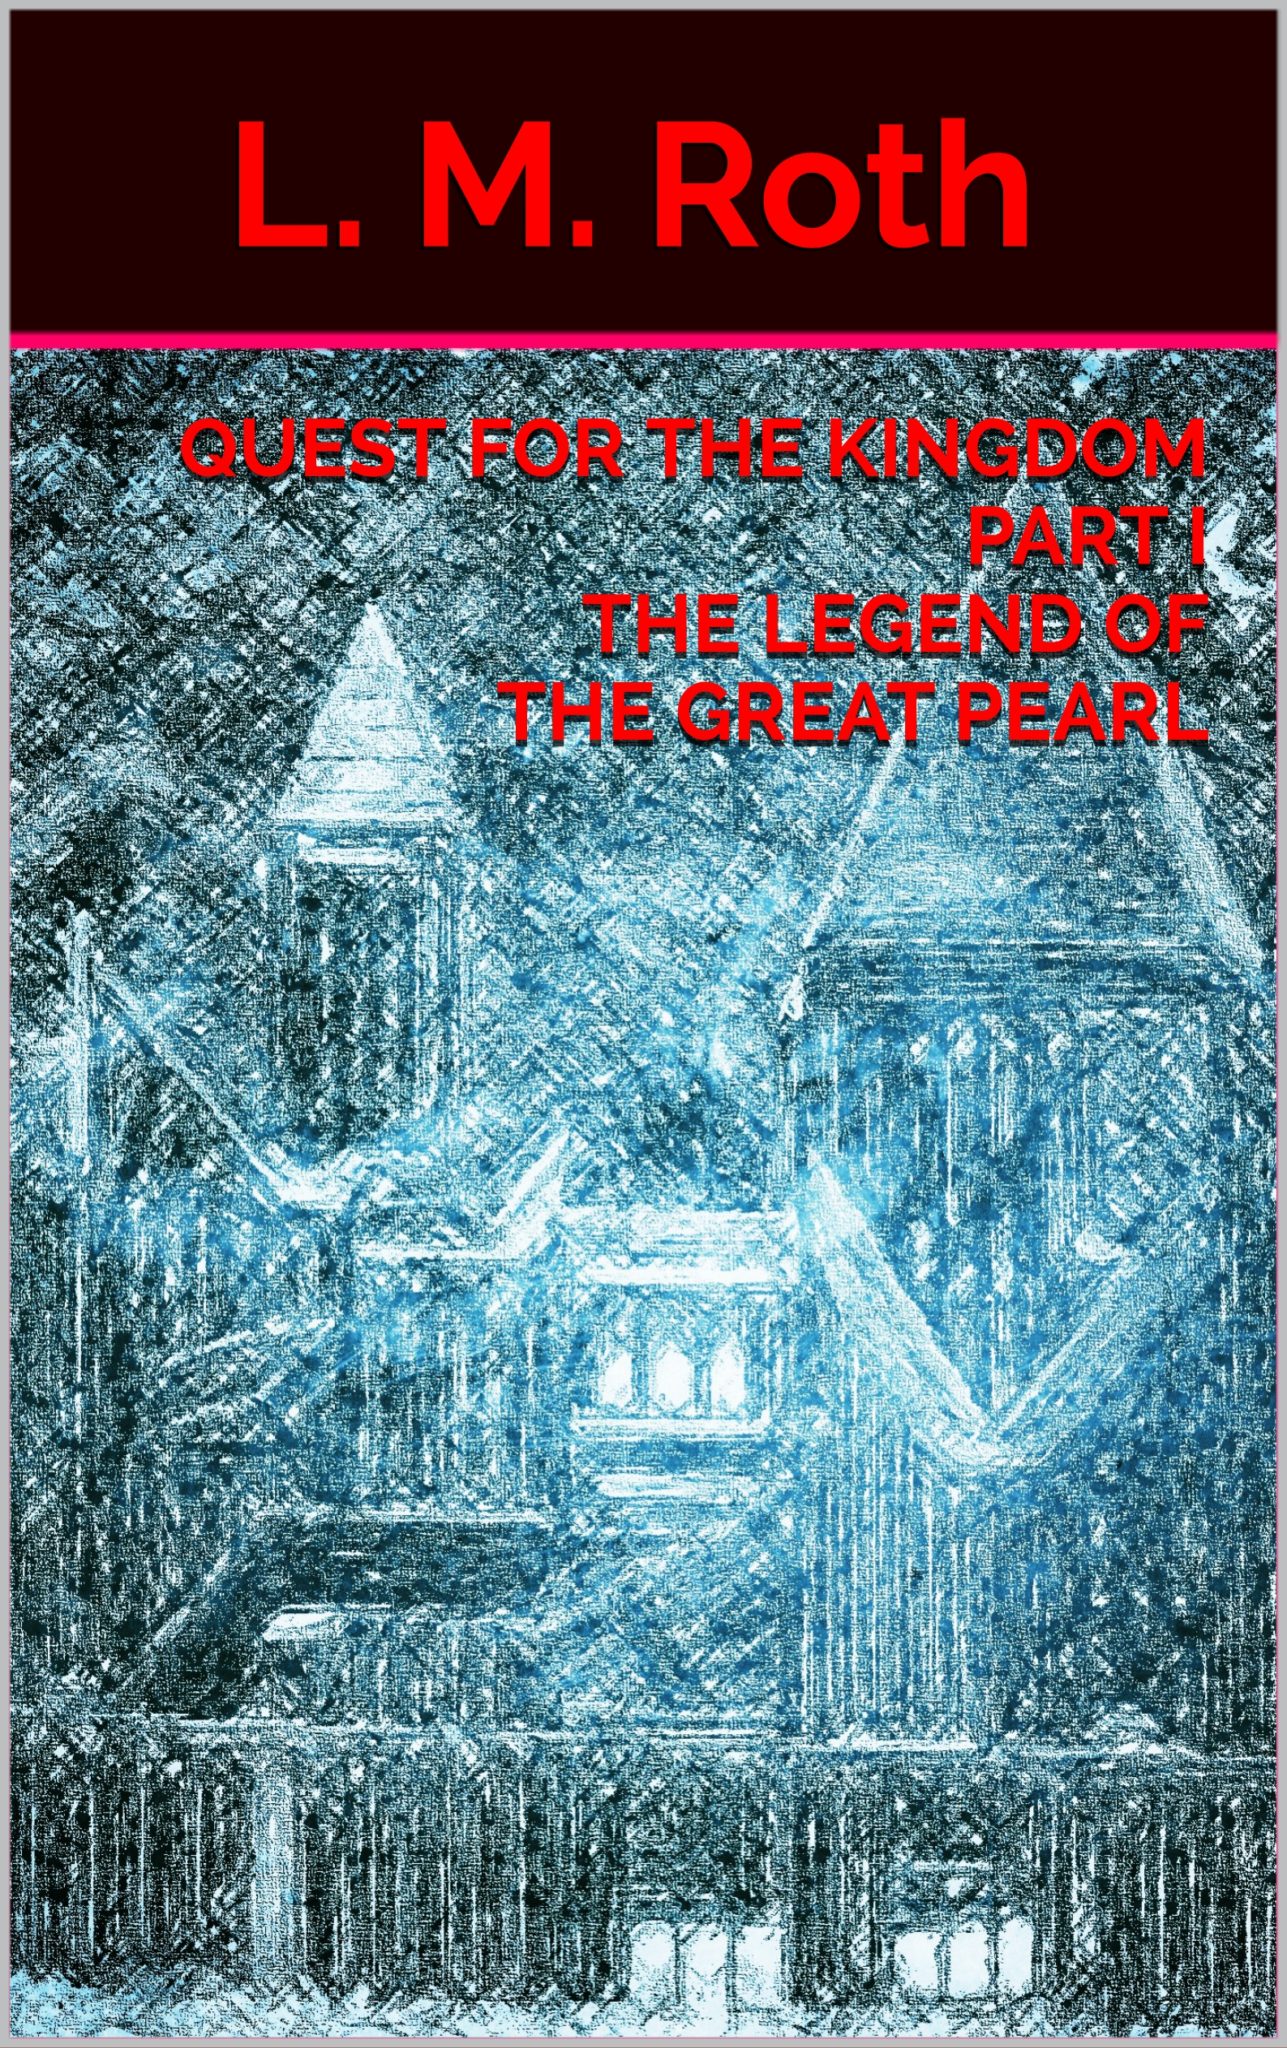 FREE: Quest For the Kingdom Part I The Legend of the Great Pearl by L. M. Roth